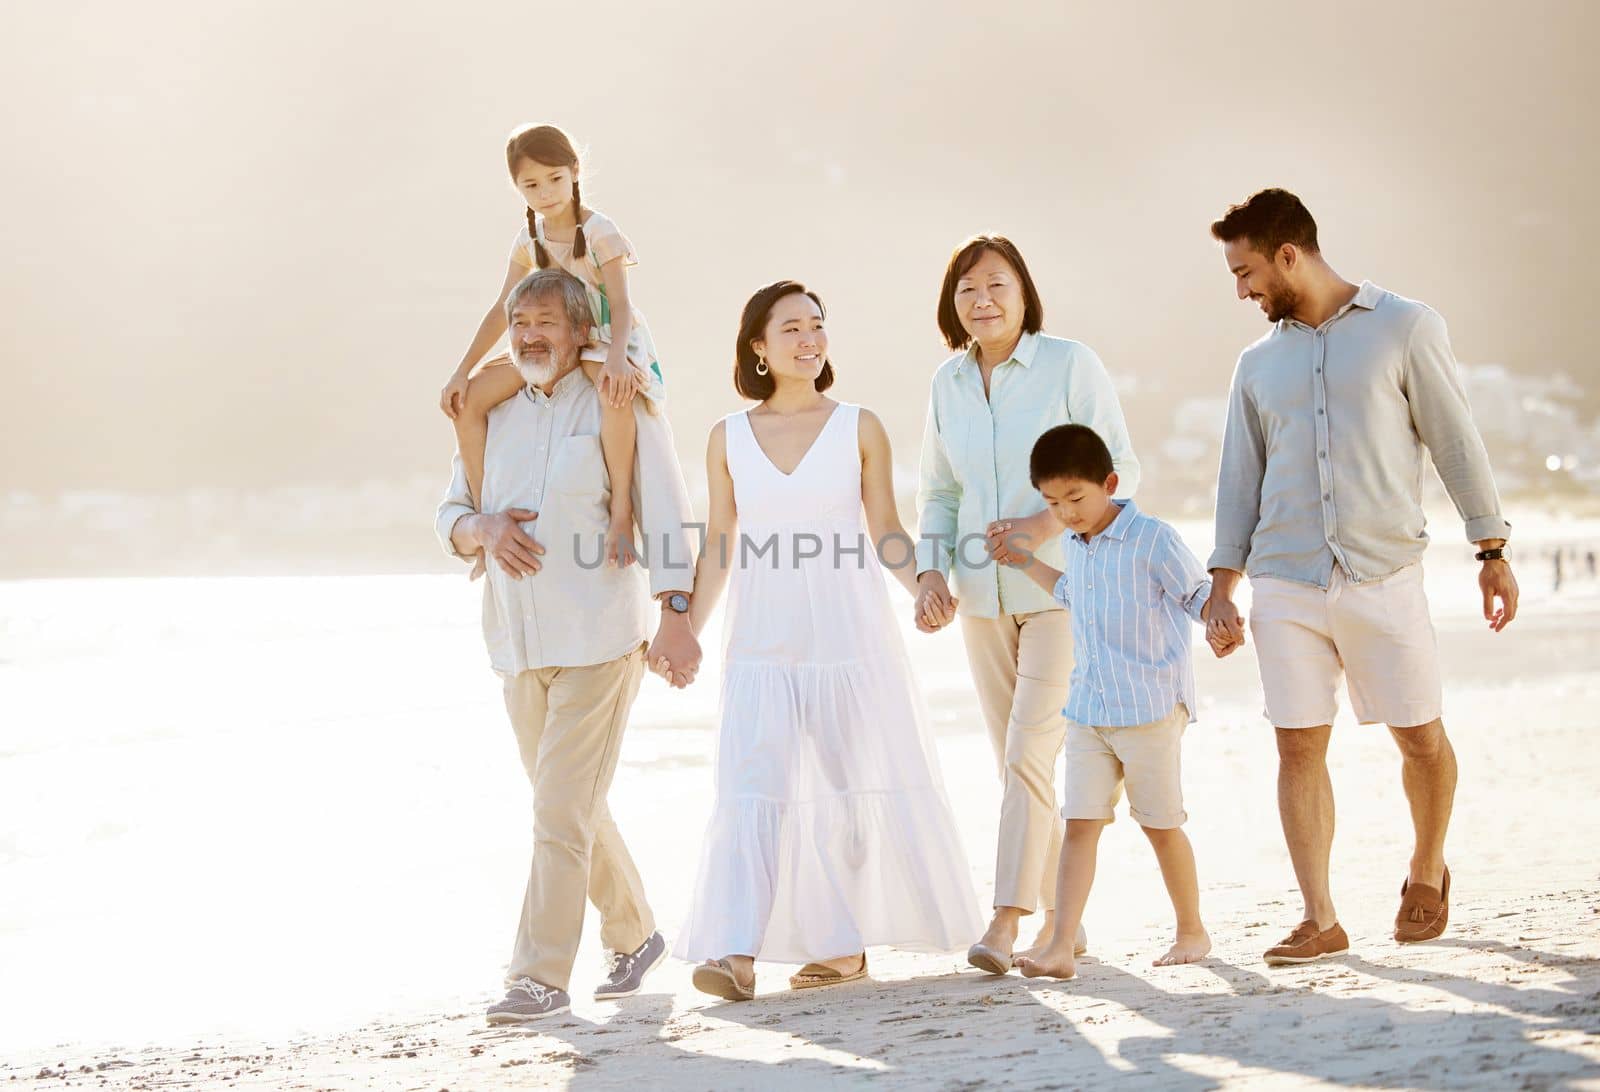 Family beach day. Full length shot of a happy diverse multi-generational family at the beach